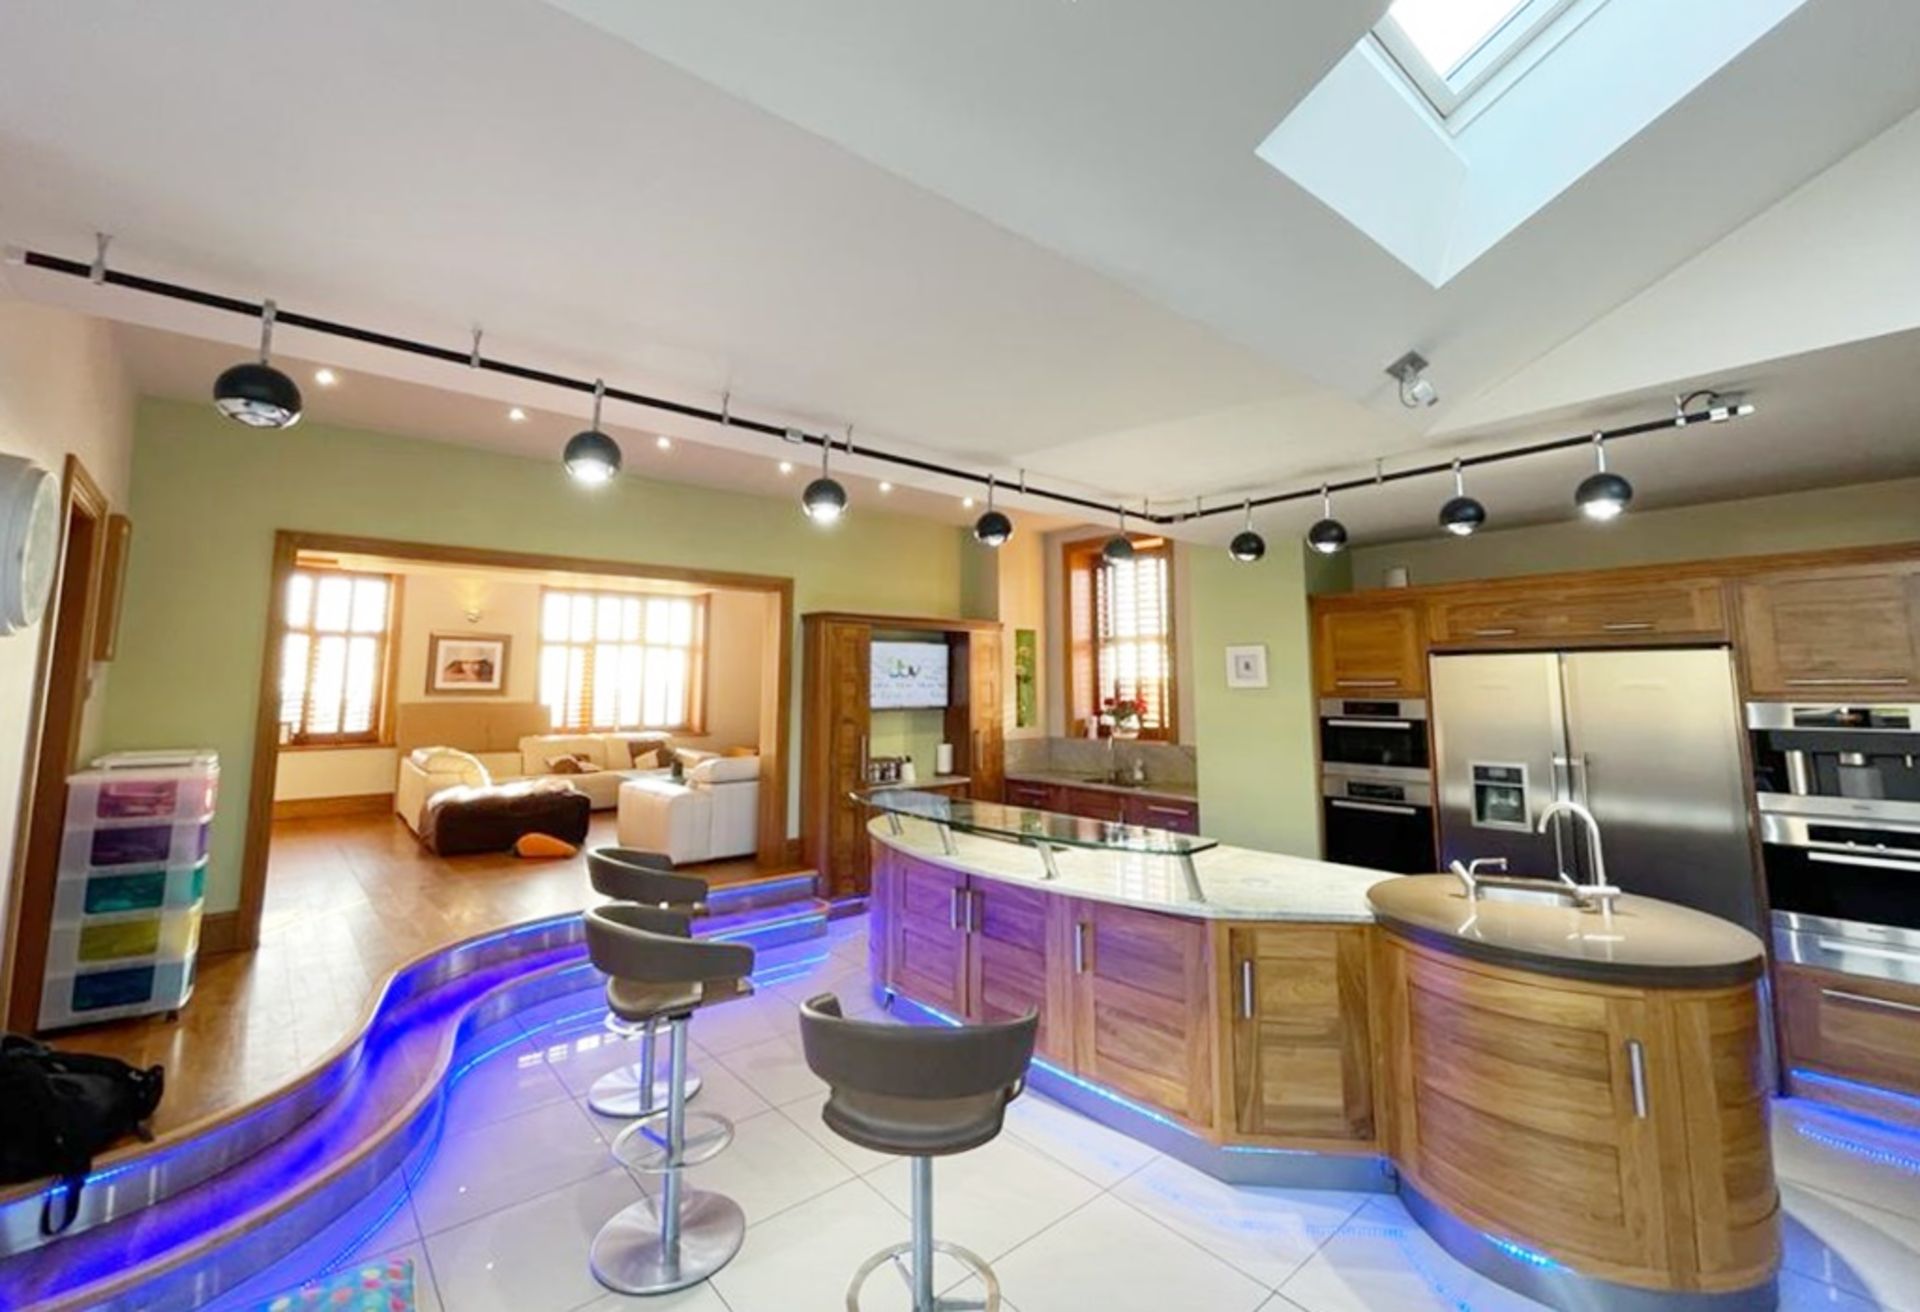 1 x Bespoke Curved Fitted Kitchen With Solid Wood Walnut Doors, Integrated Appliances, Granite Tops - Image 98 of 147